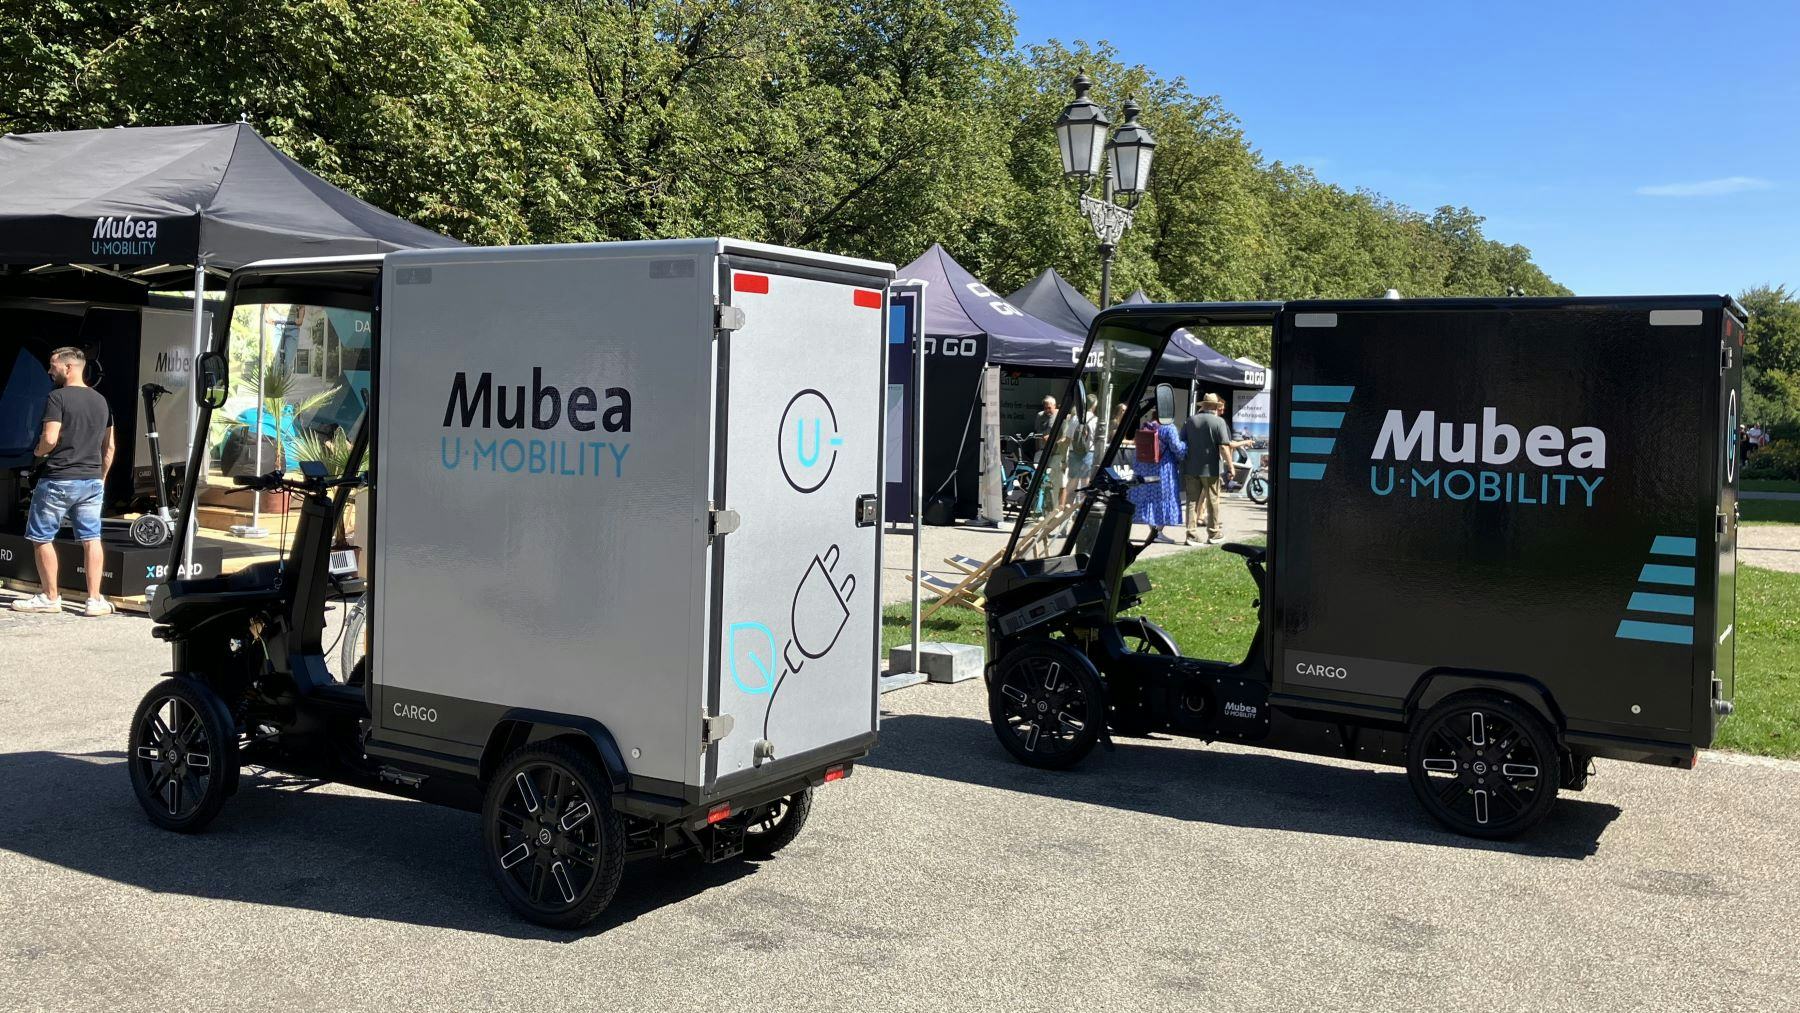 With its micromobility products Mubea aims to "get people excited about e-mobility, challenge the status quo and actively drive change."- Photo Bike Europe